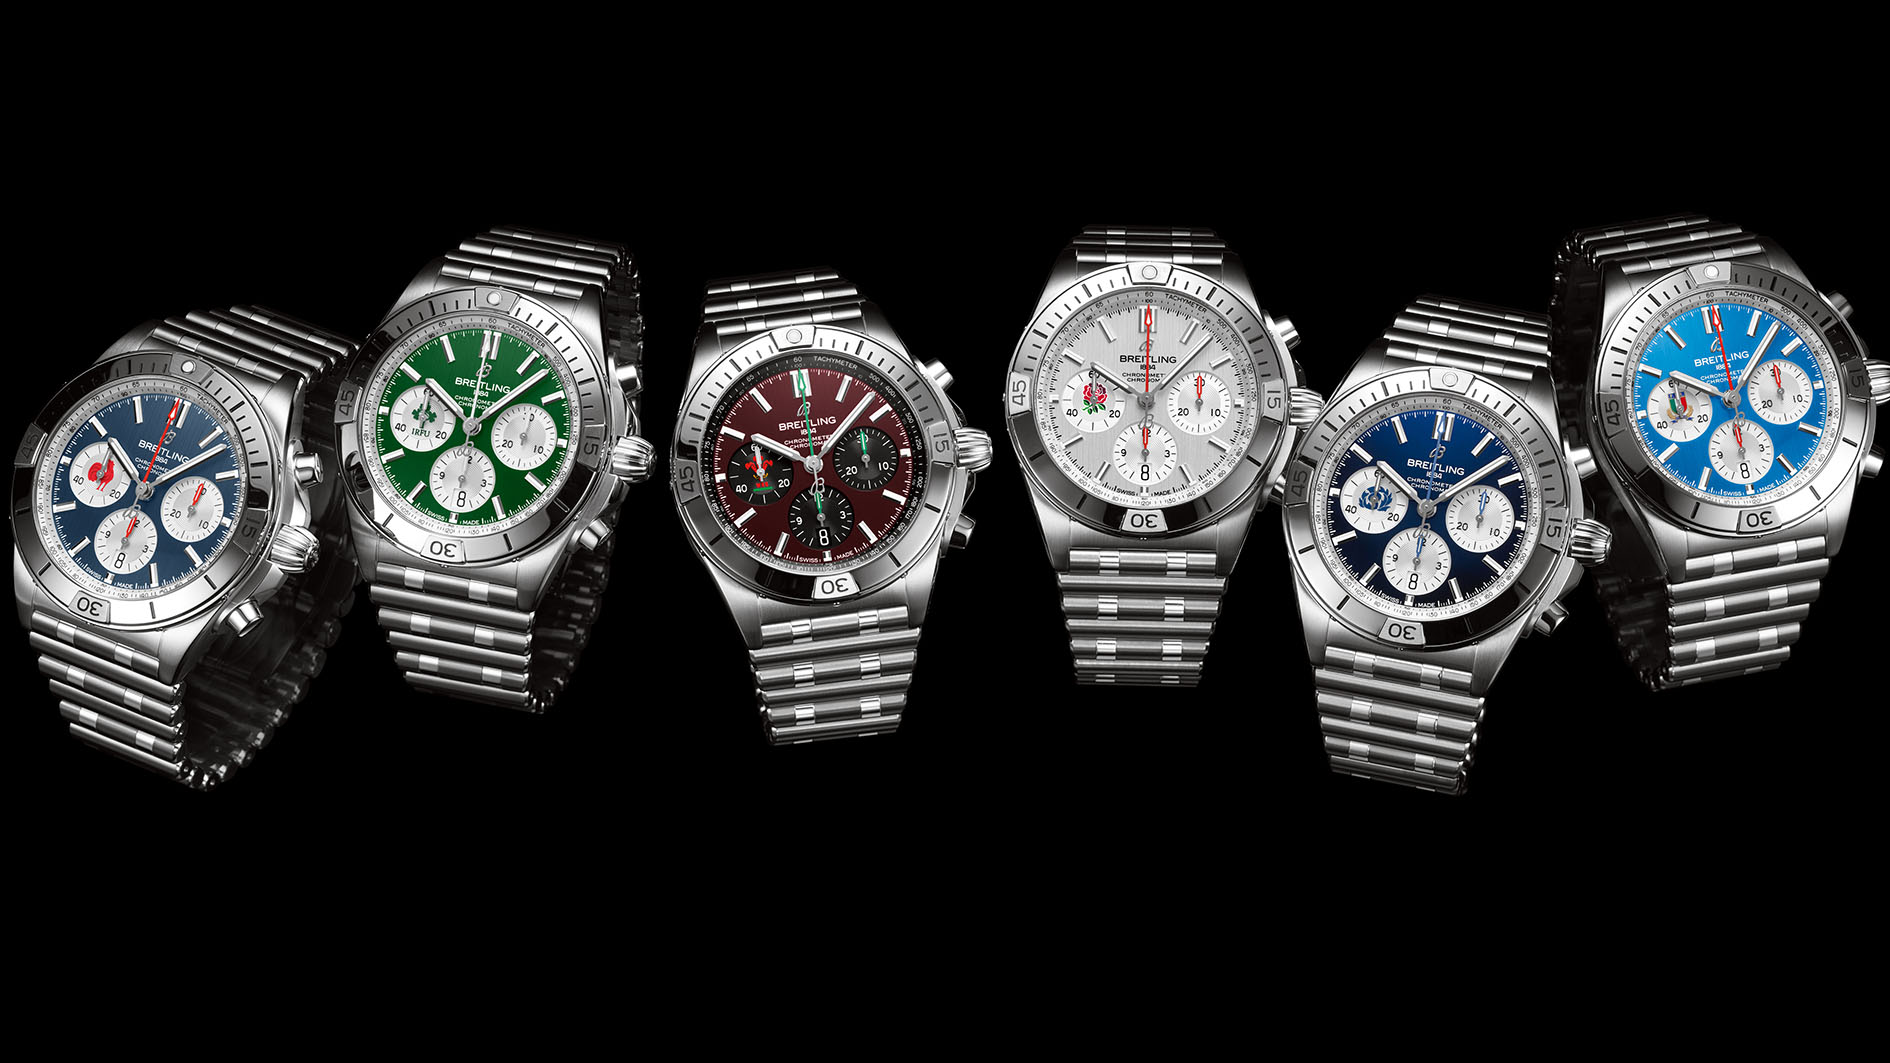 Breitling Chronomat Six Nations (References BR-AB0134A81C1A1-AB0134A91L1A1-AB0134A61K1A1-AB0134A71A1A1-AB0134A51C1A1-AB0134A41C1A1)